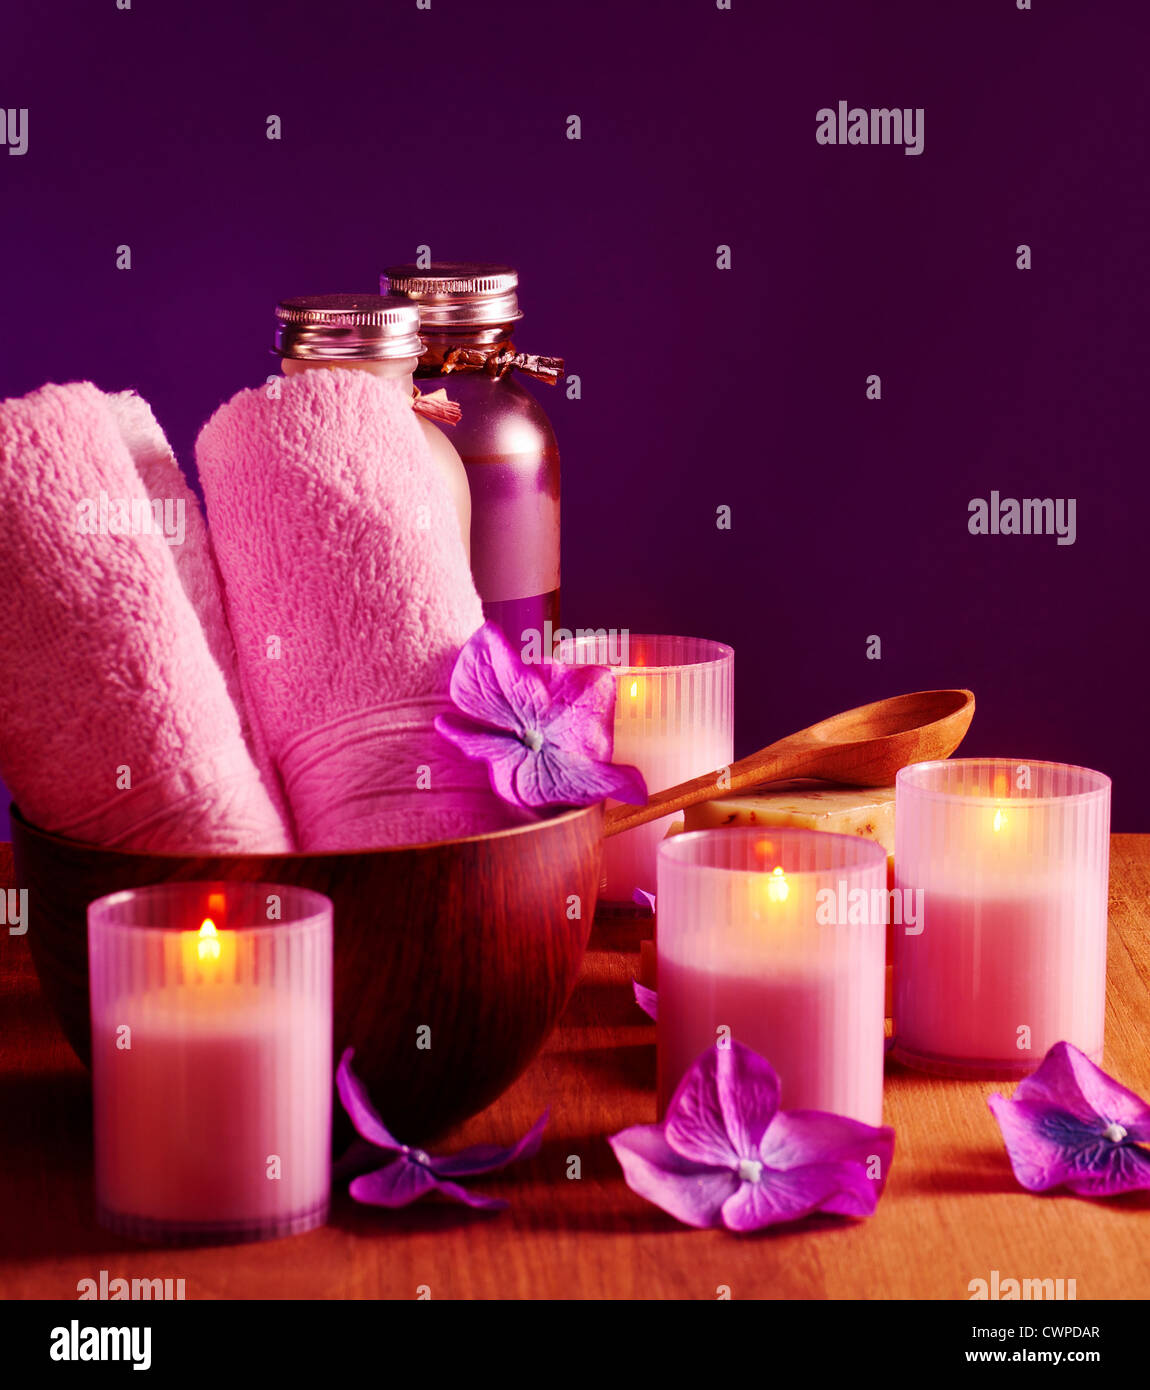 Photo of spa still life on purple background, picture of pink bath candles  and bottles with massage oil, image of soft towel Stock Photo - Alamy